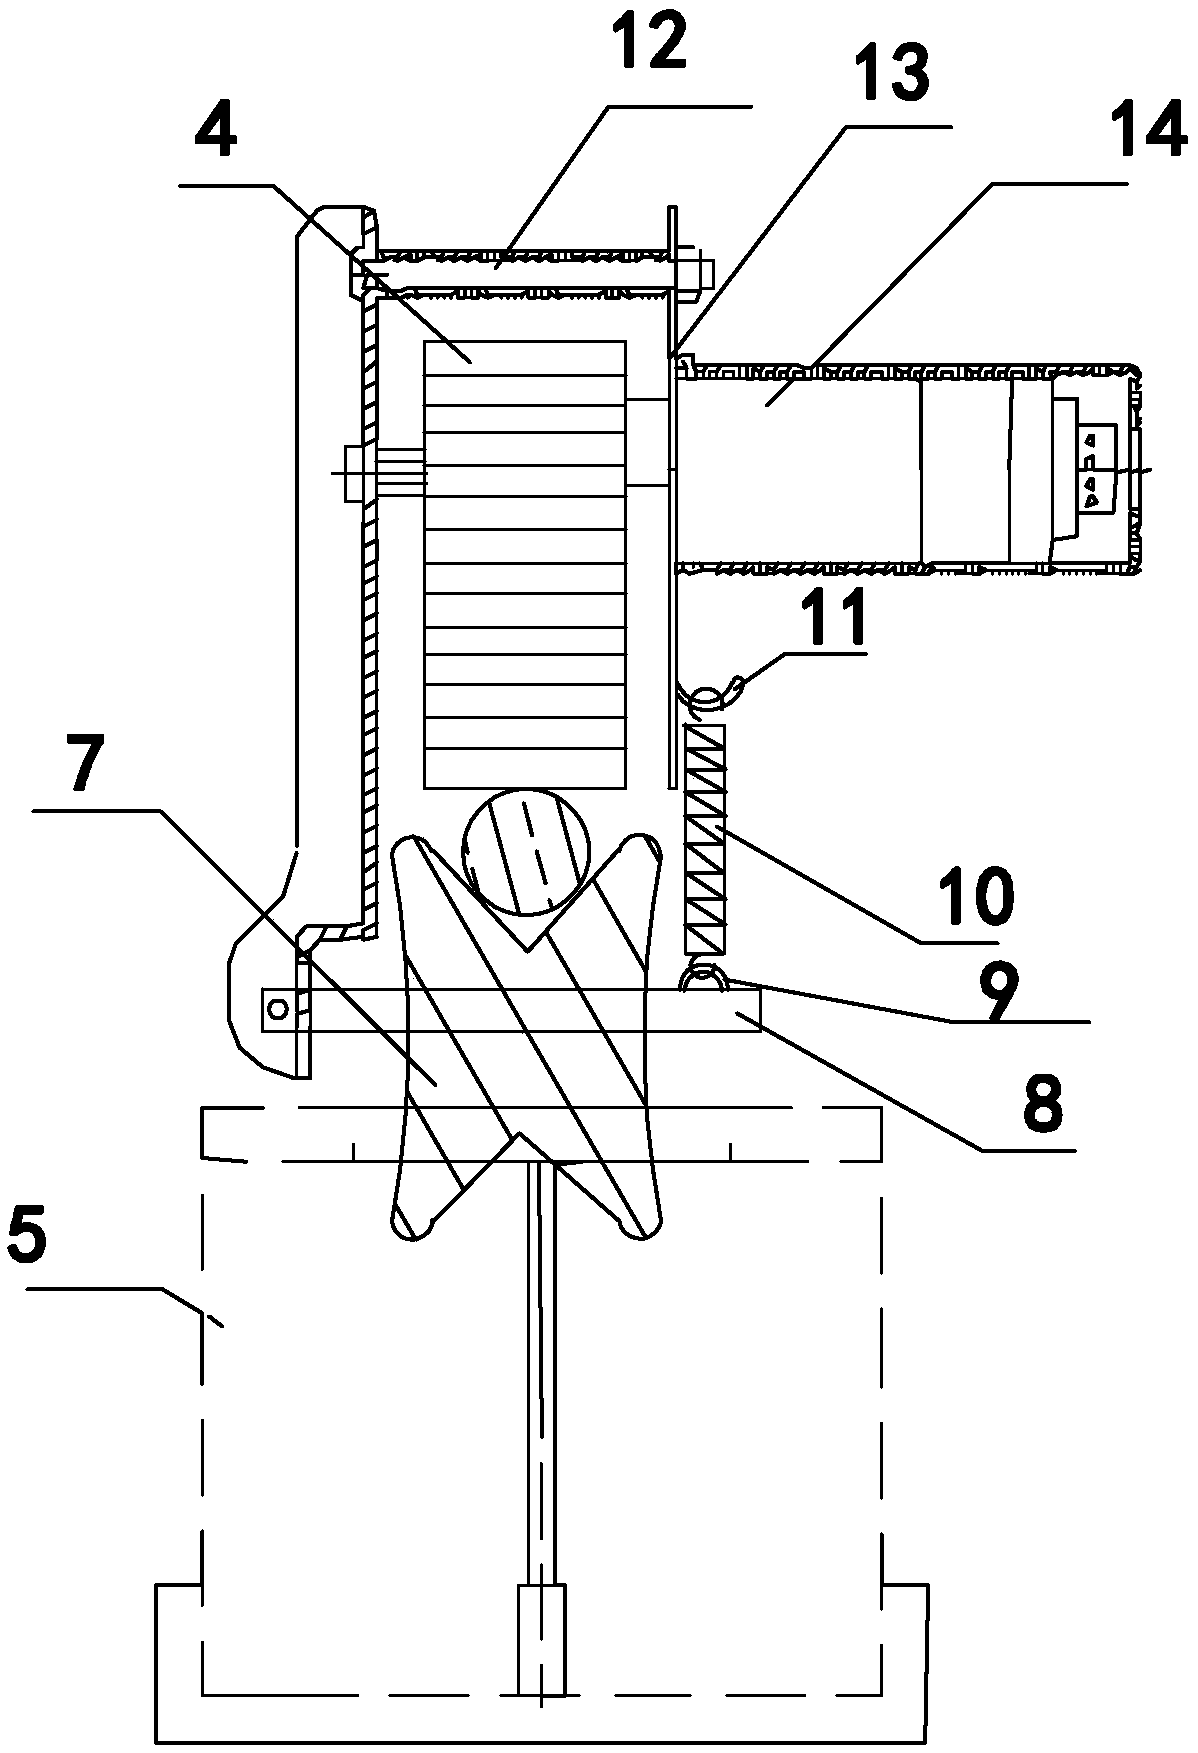 System and method for automatically detecting distance between crossing points of power transmission line